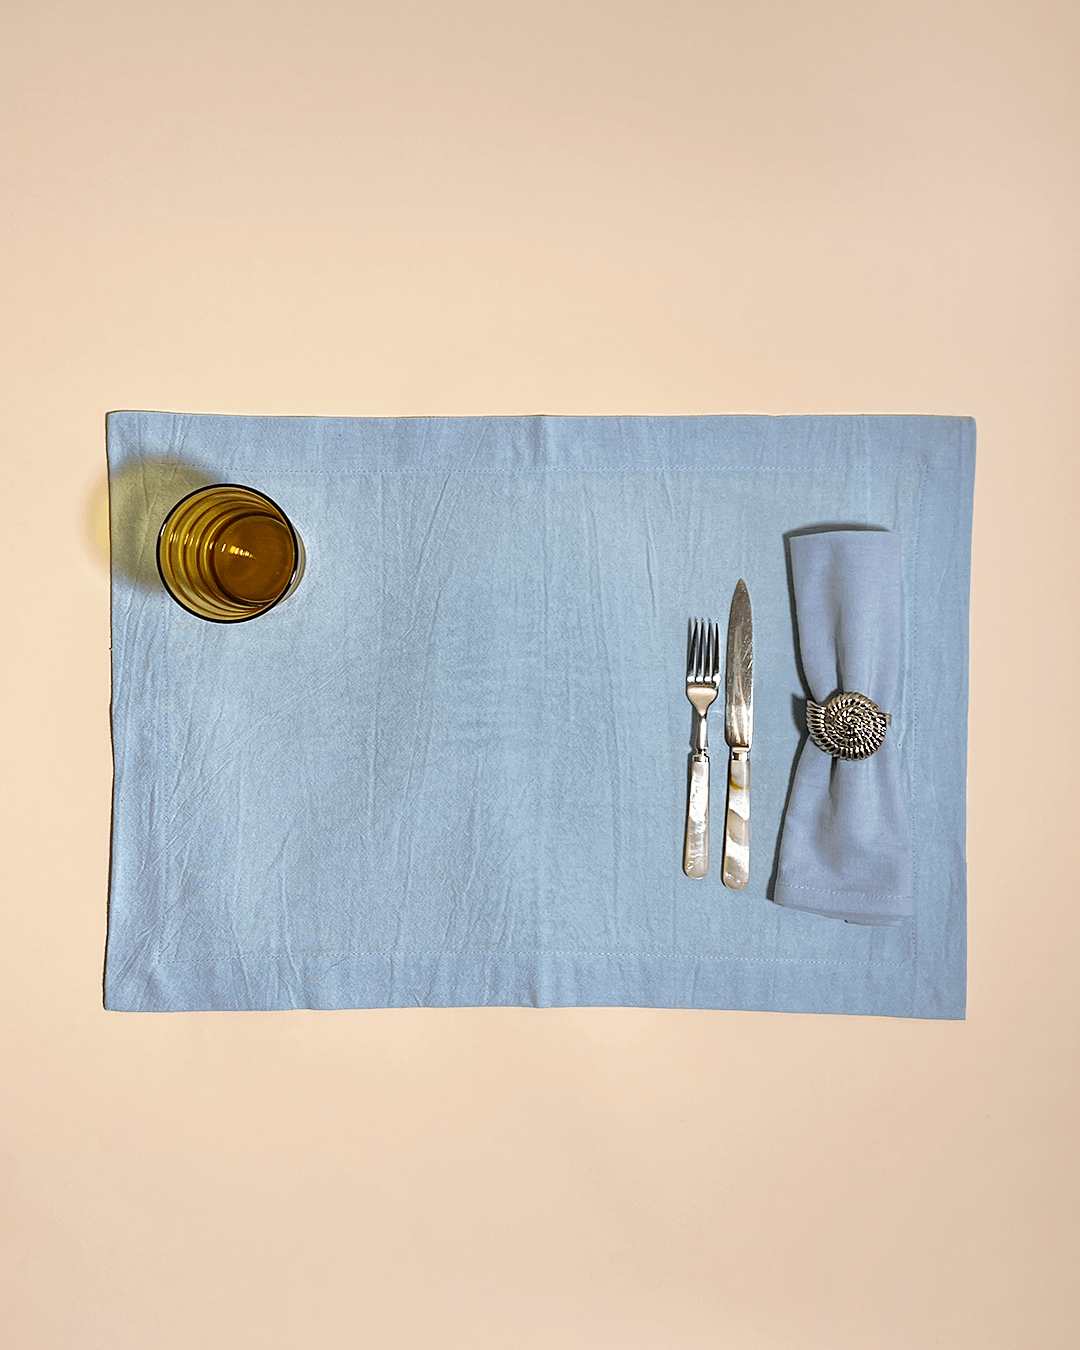 This cotton placemat comes in a set of 4 and ideally covers your dinner table. The whole tableware collection by Arles Studio is inspired by the idea of setting a fine table and sharing a meal with friends and family. The products are dyed by hand, keeping its natural texture and feel. The fabrics are made from 100% cotton and the soft and creamy pastel colors are spot on.  Our tip: mix and match with the Arles Studio napkins and tablecloths.